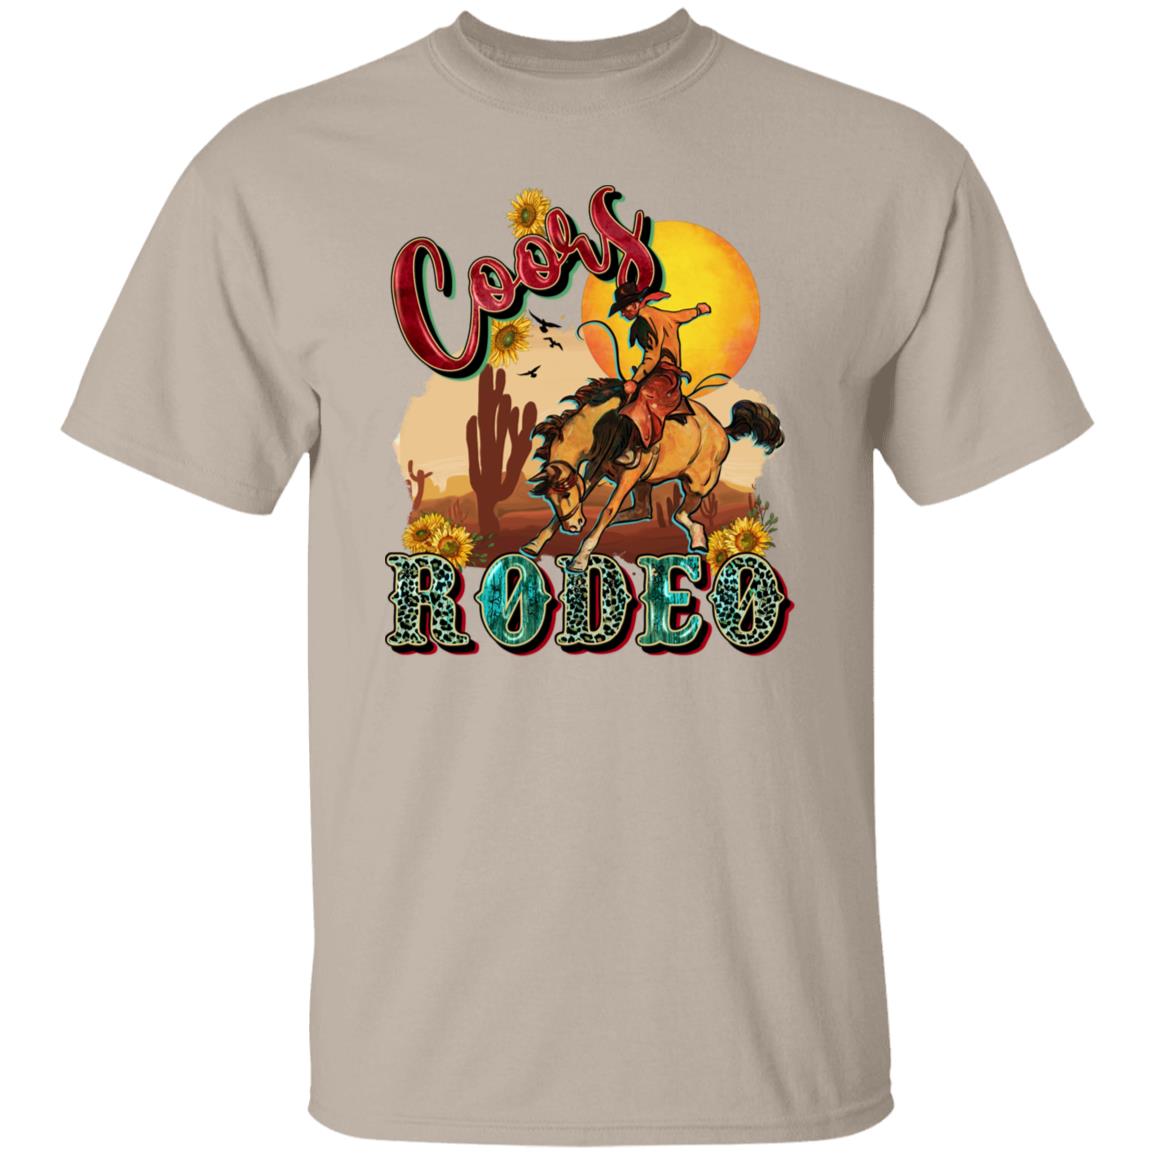 Coors Rodeo T-Shirt Western Texas Rodeo cowboy Unisex tee White Sand Sport Grey-Family-Gift-Planet